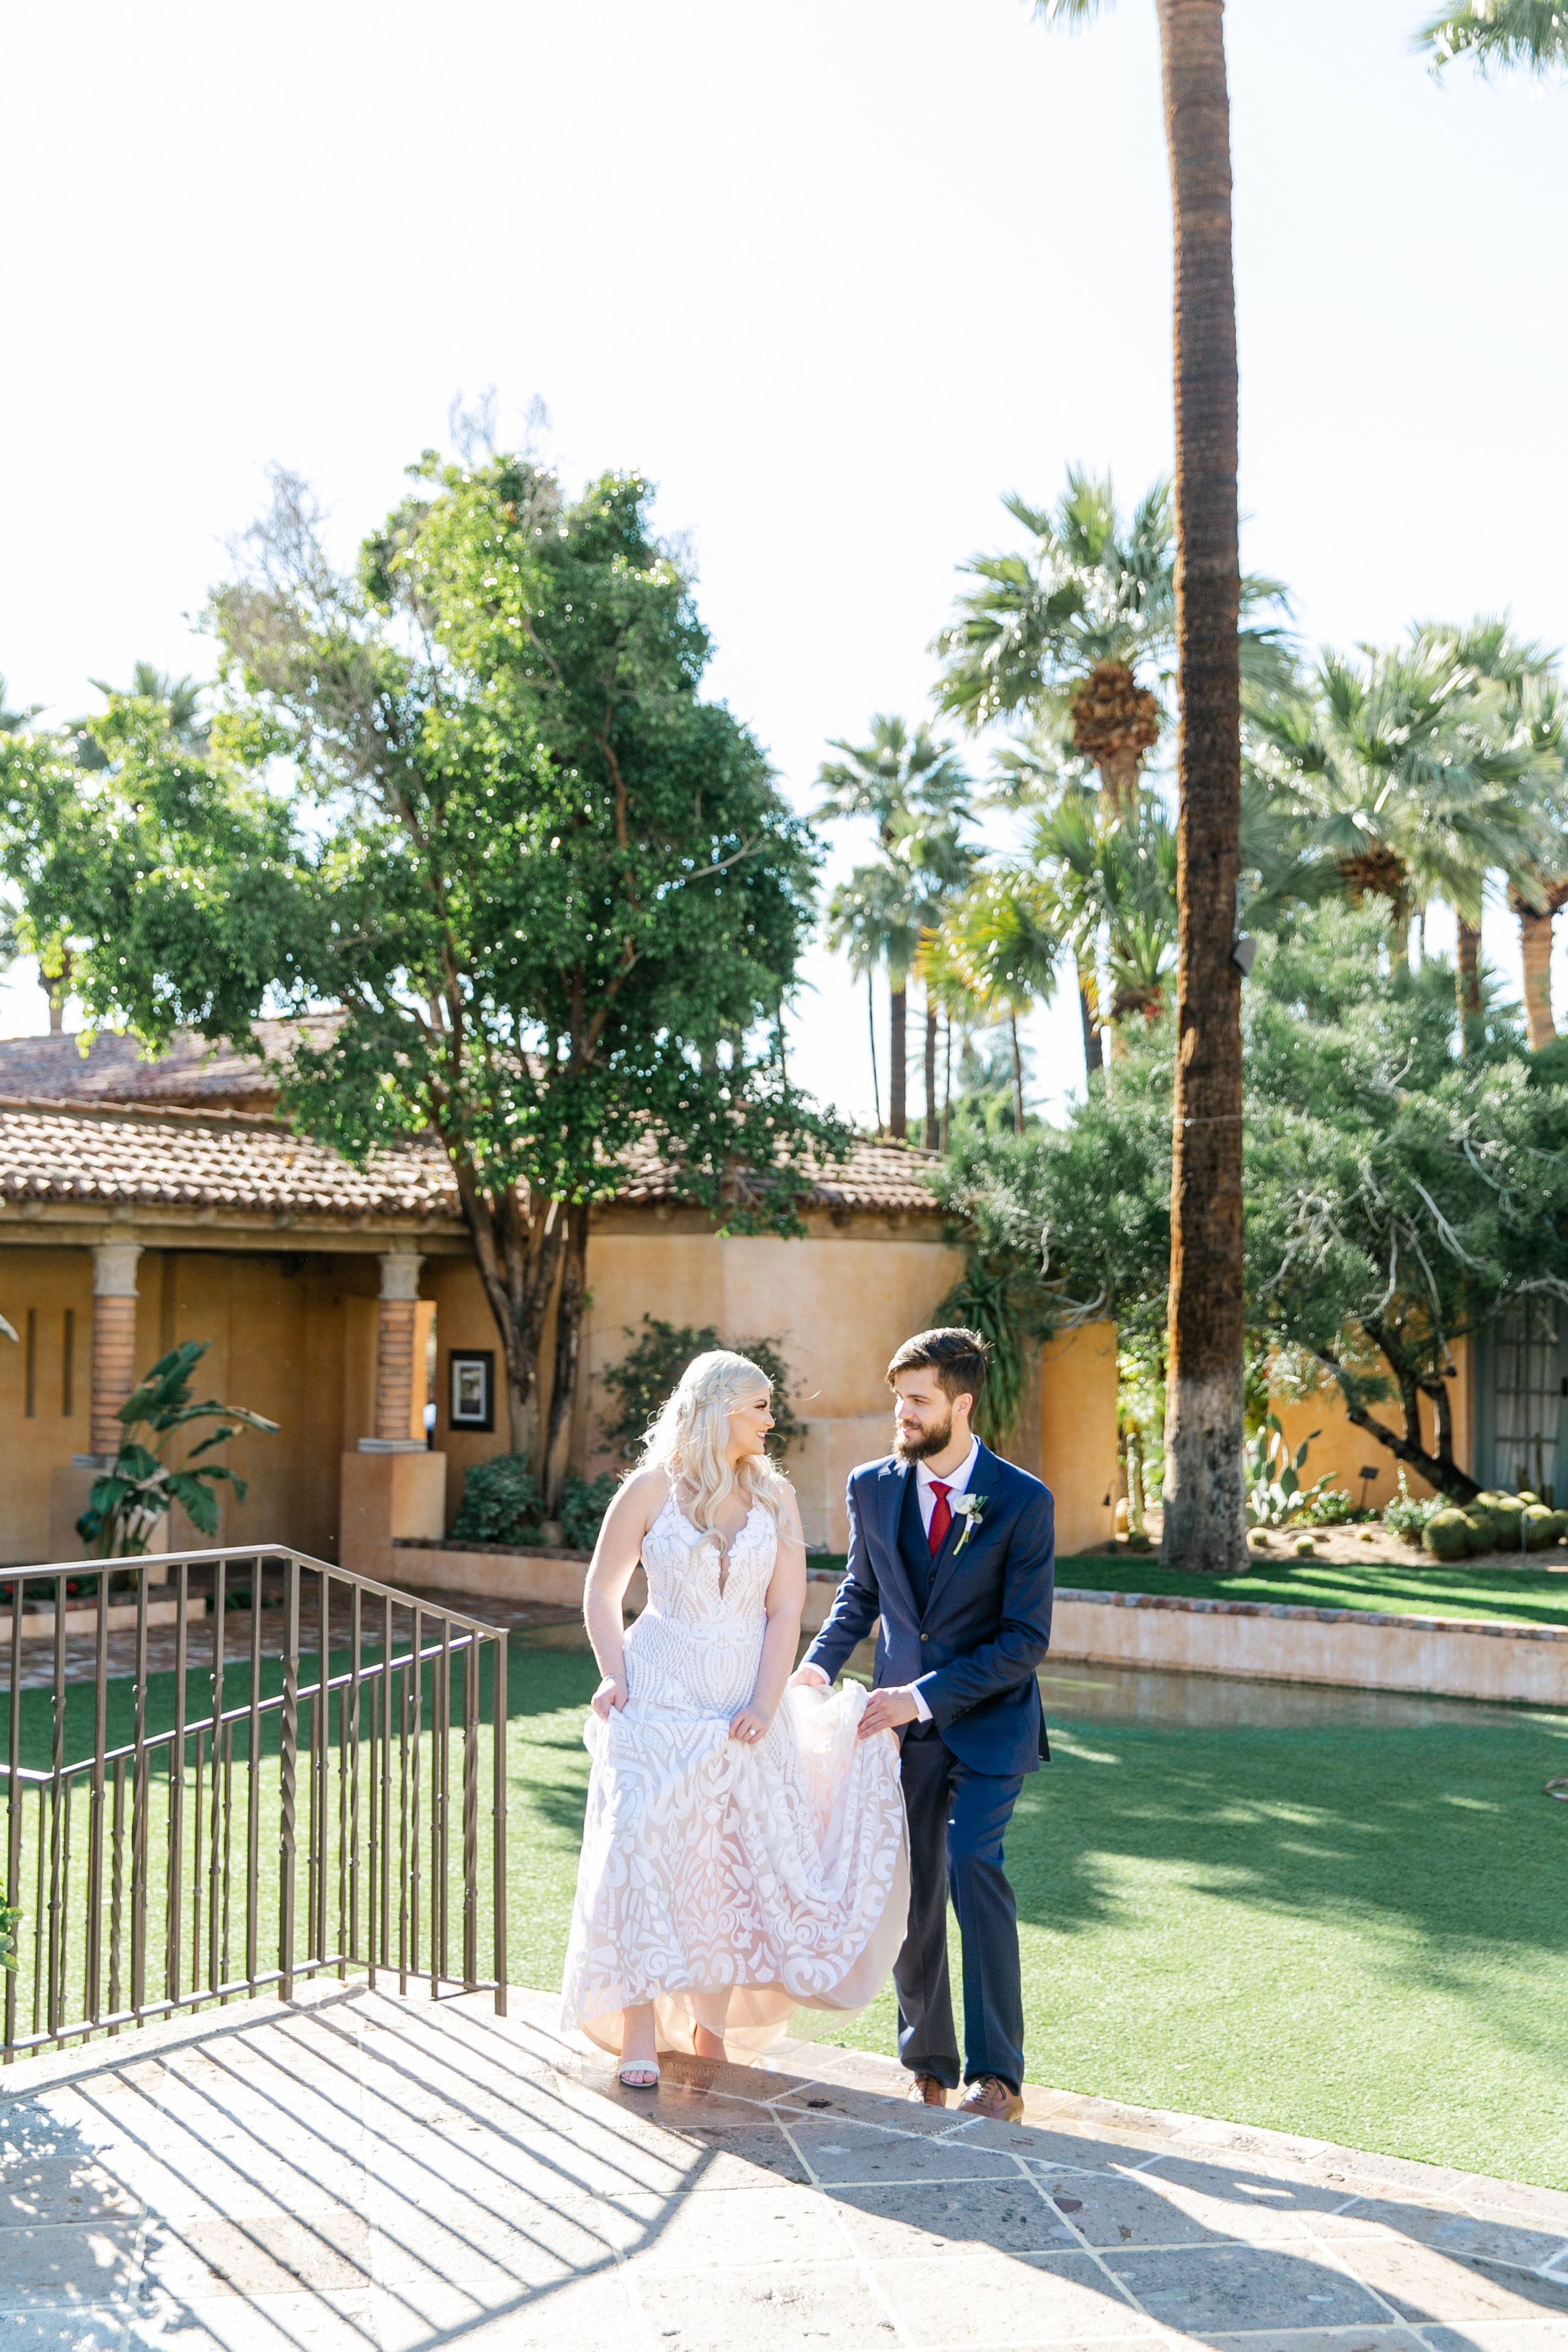 Karlie Colleen Photography - The Royal Palms Wedding - Some Like It Classic - Alex & Sam-177